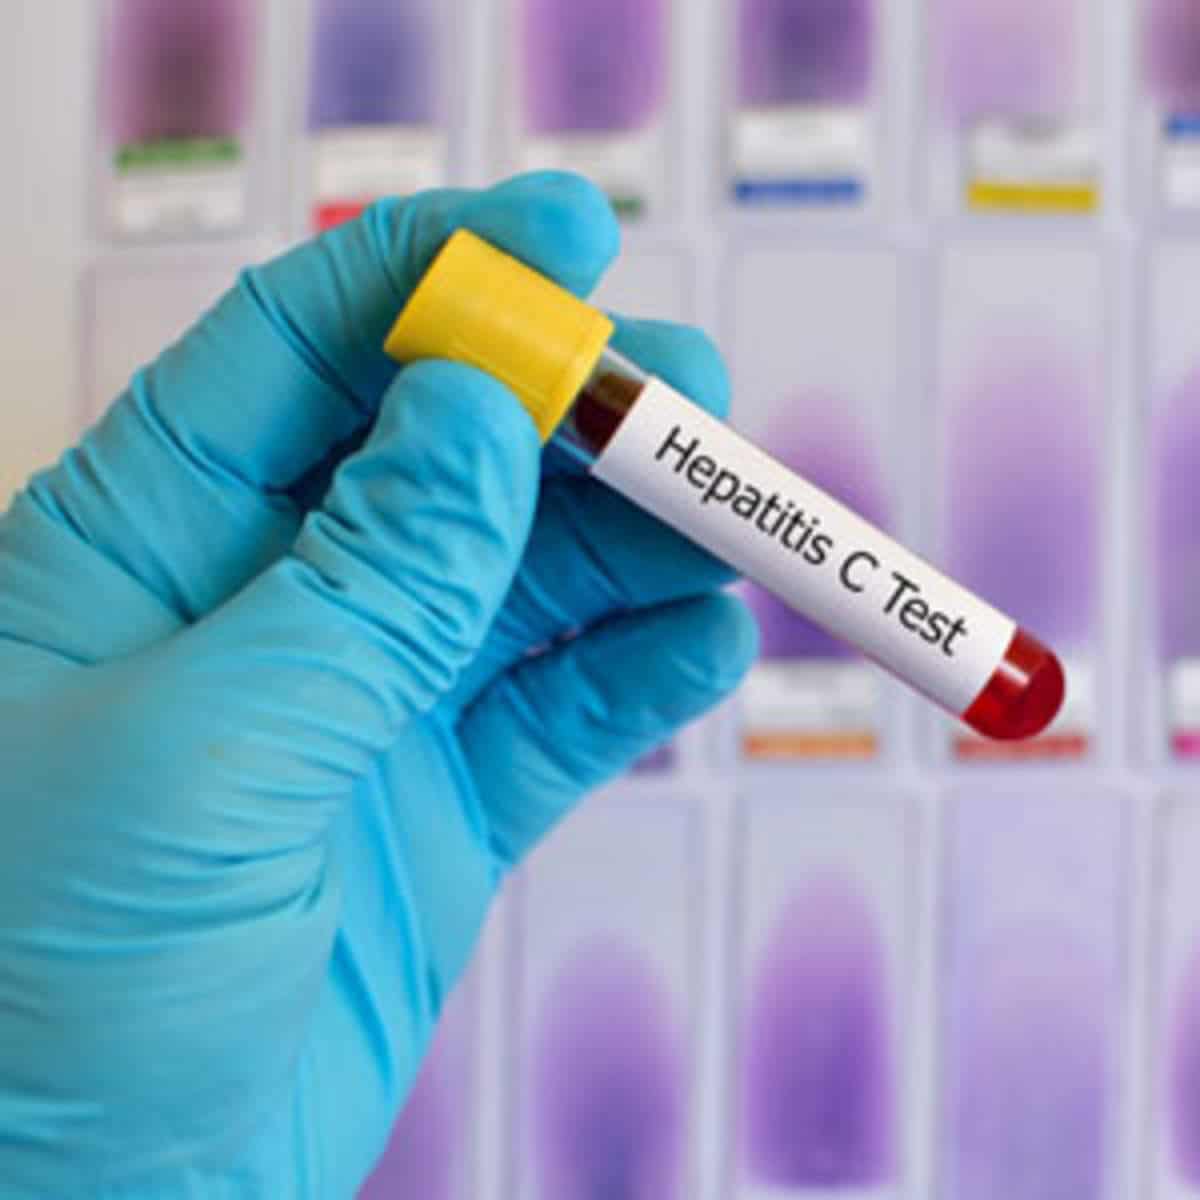 Hepatitis C Antibody Testing of MSM at STI Clinic Yields More Cases Faster